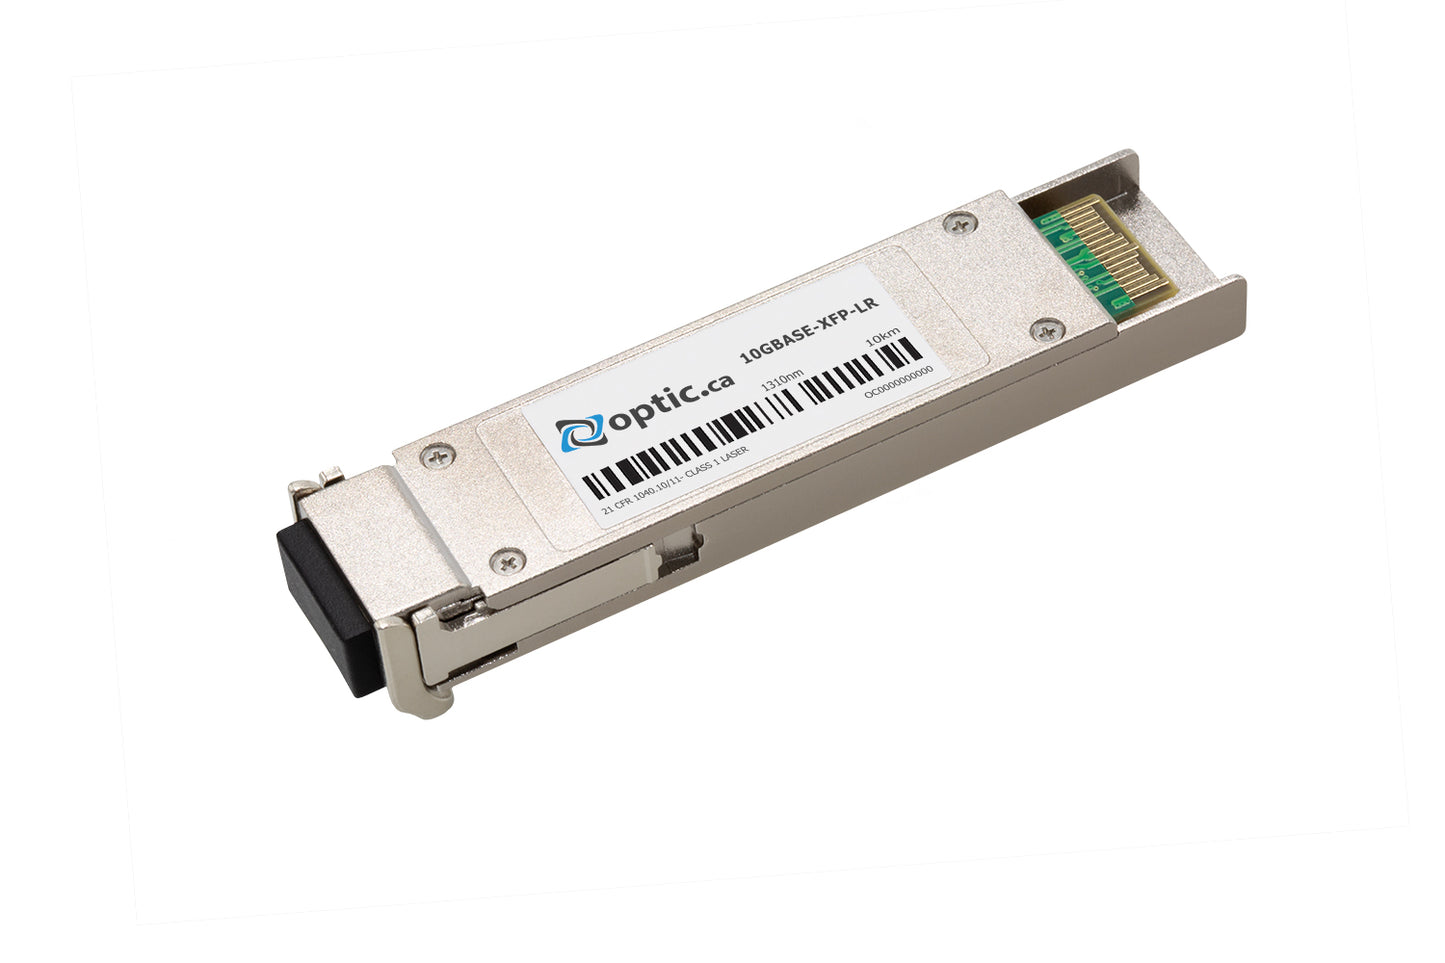 OPTIC.CA - 10GBASE-LR XFP - XFP-10GE-LR-RED-OC - REDBACK COMPATIBLE